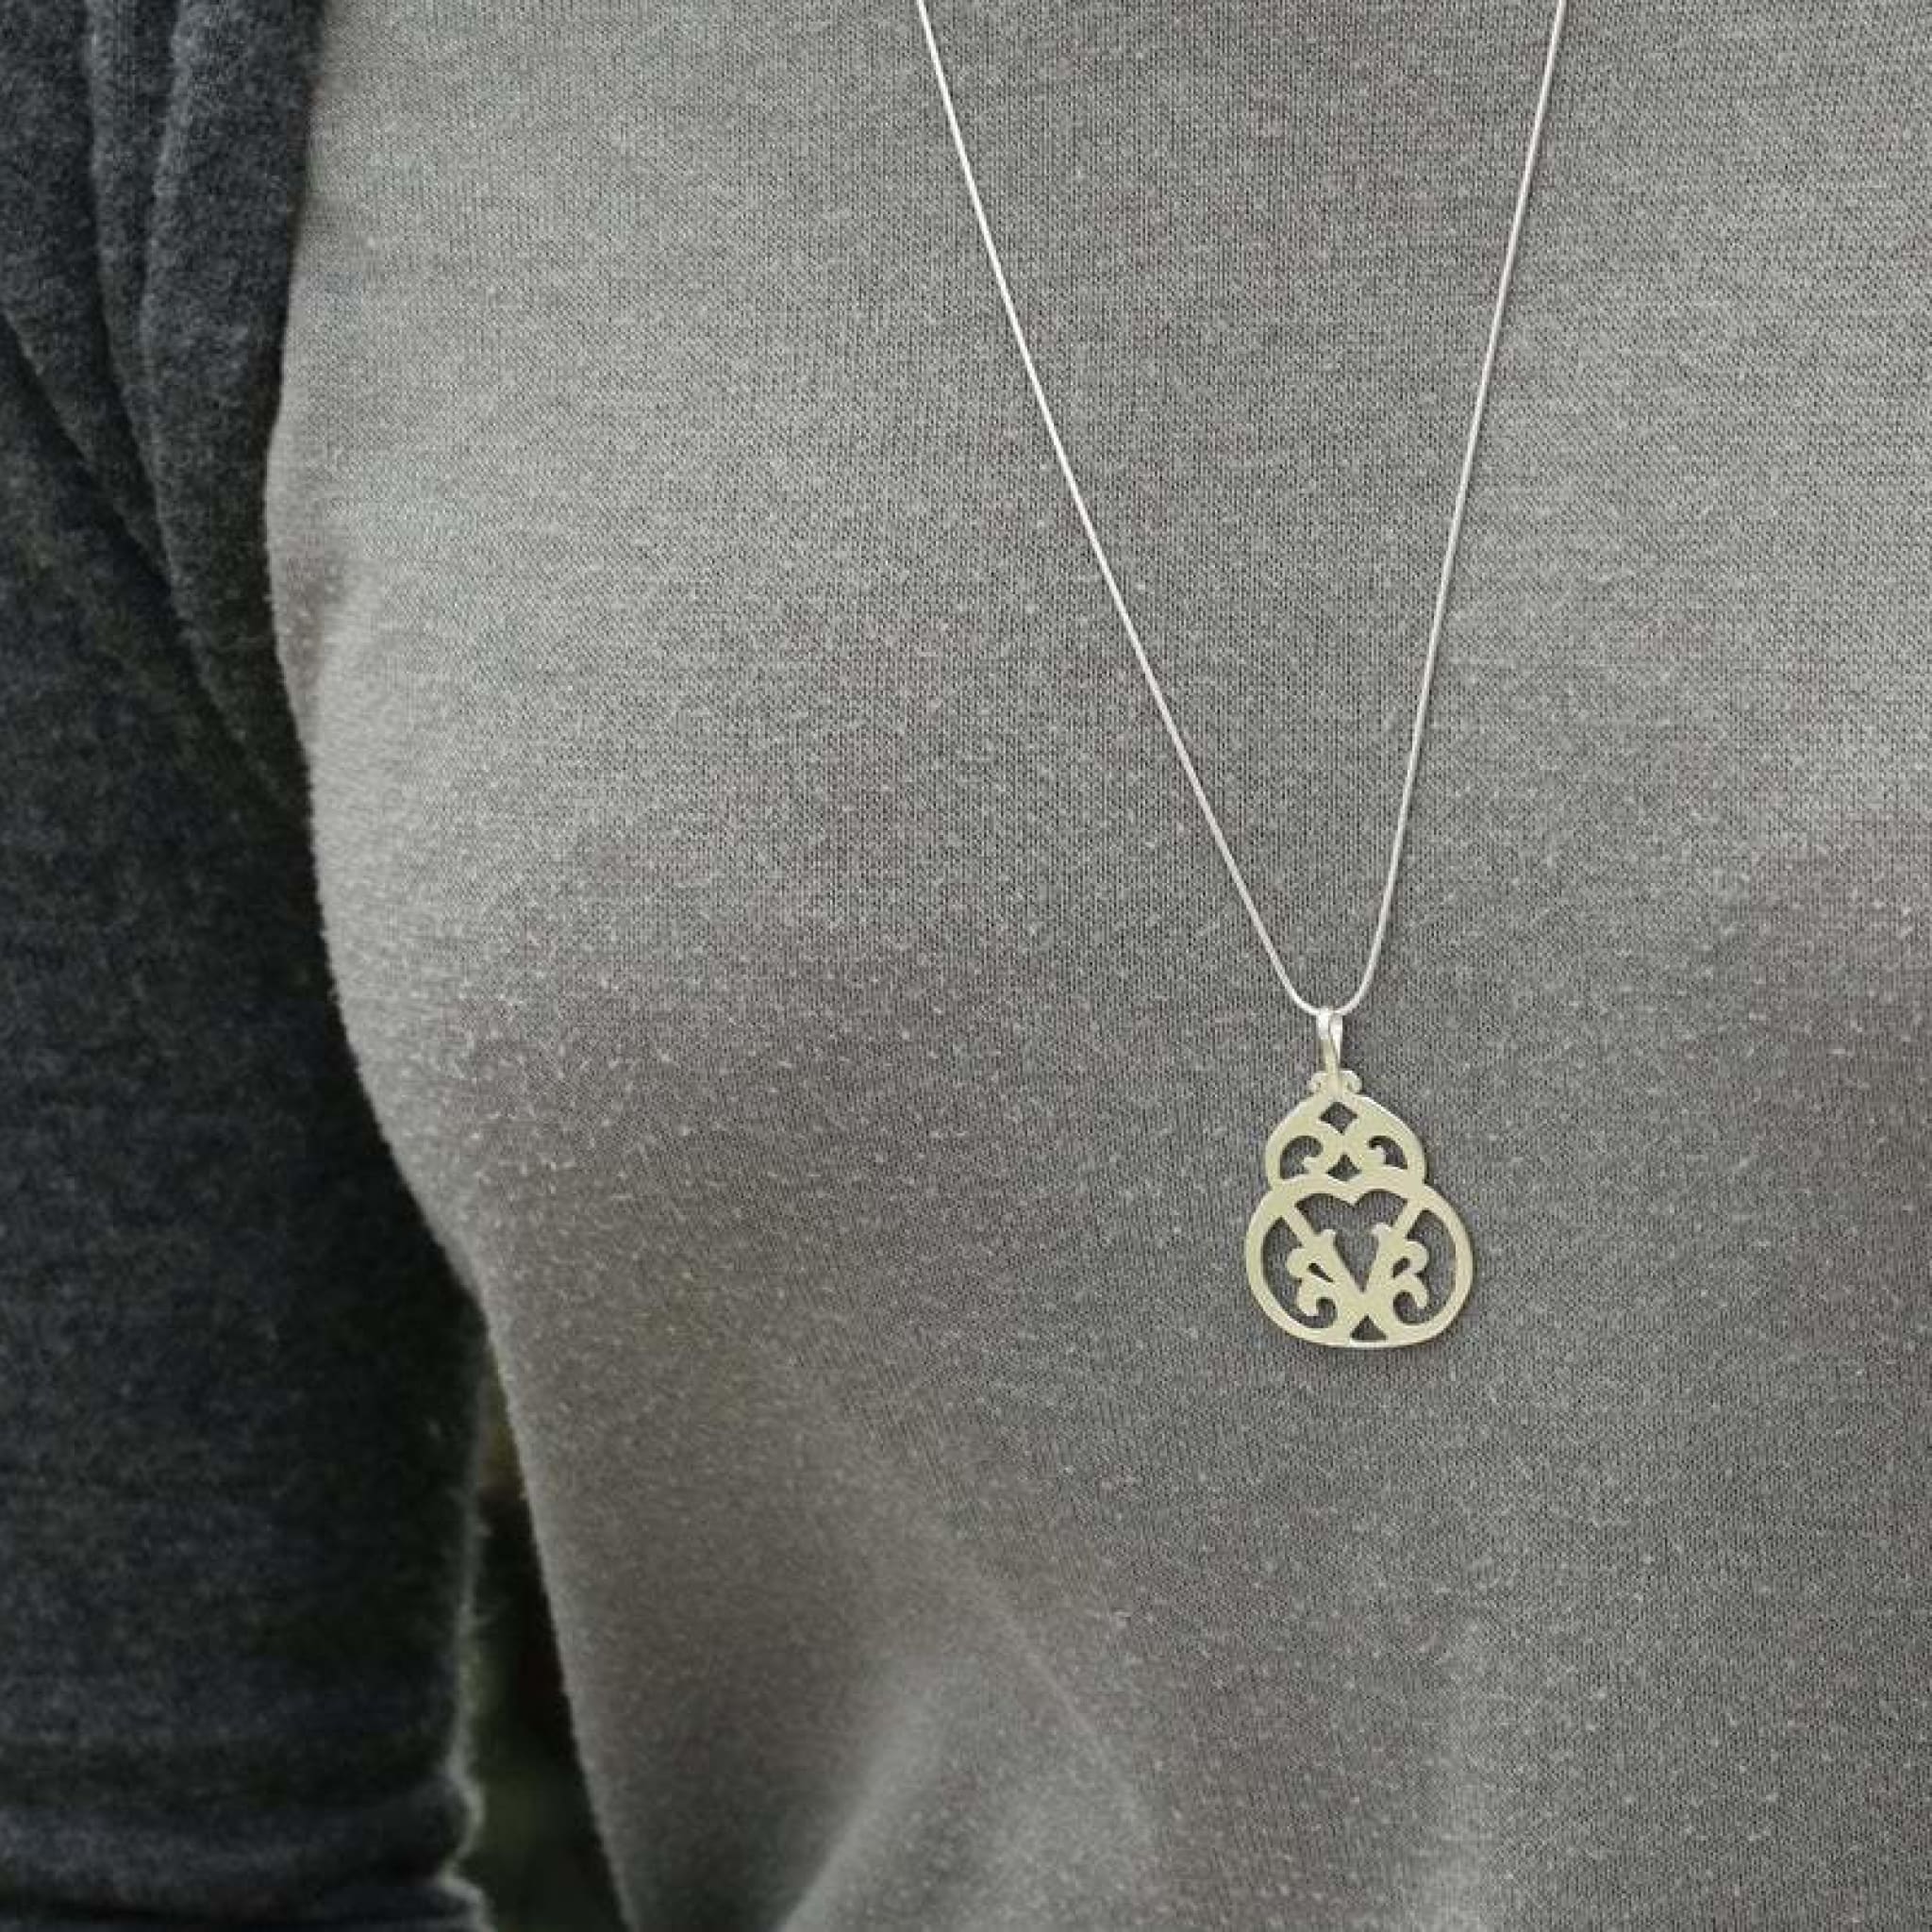 Intricate Silver Pendant Necklace Necklaces